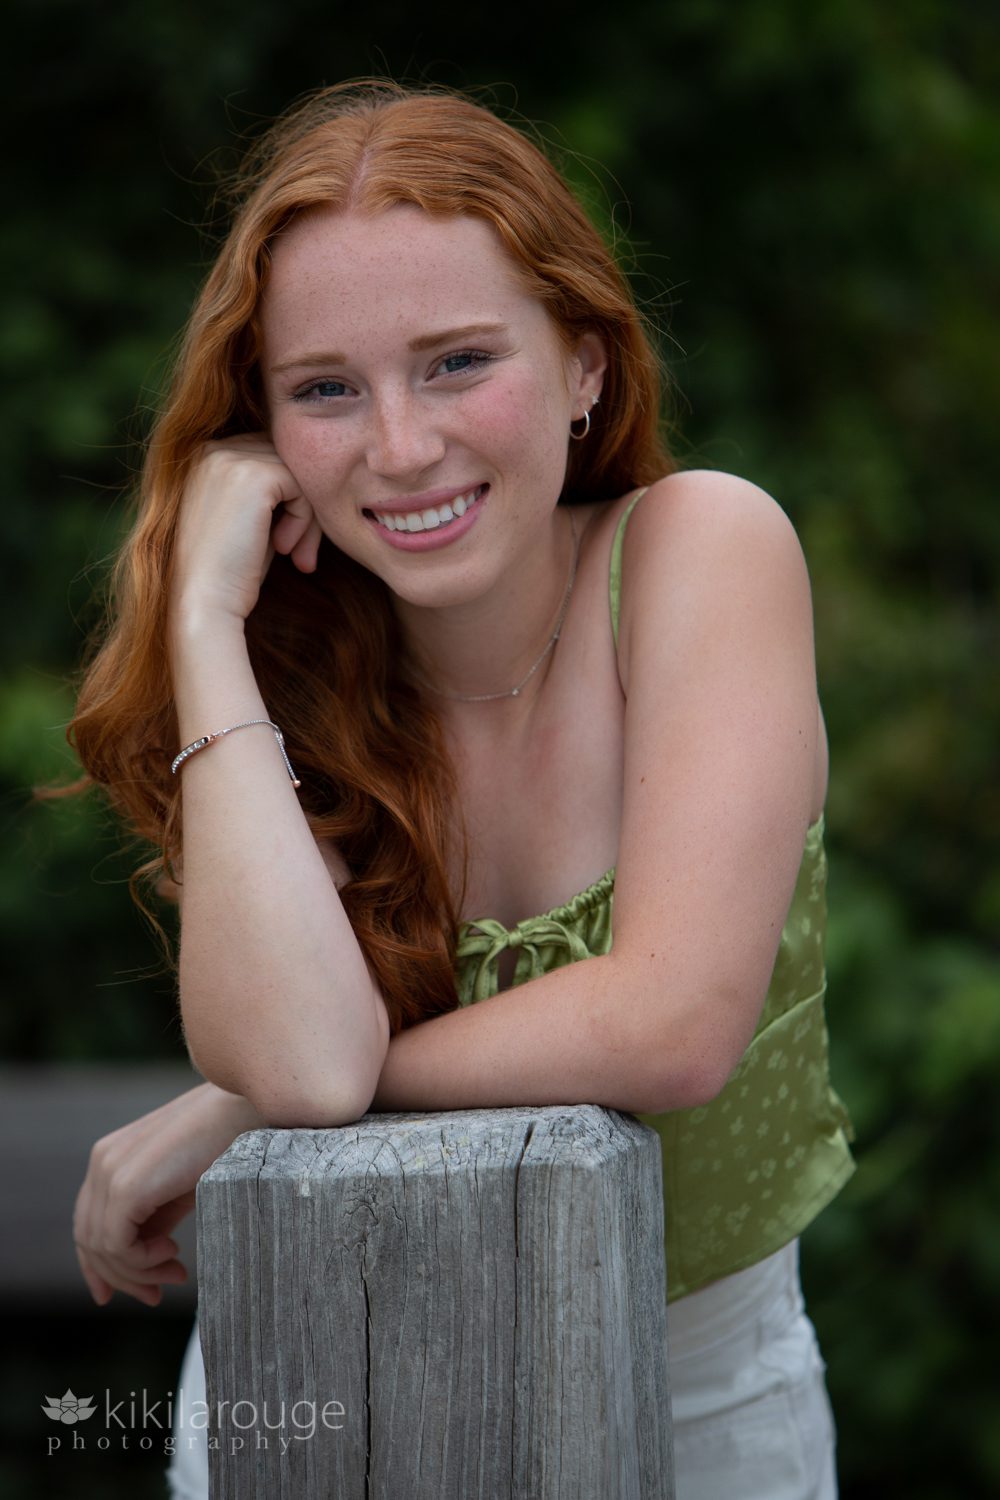 Senior portrait girl with red hair and green silk tank top leaning on wood post